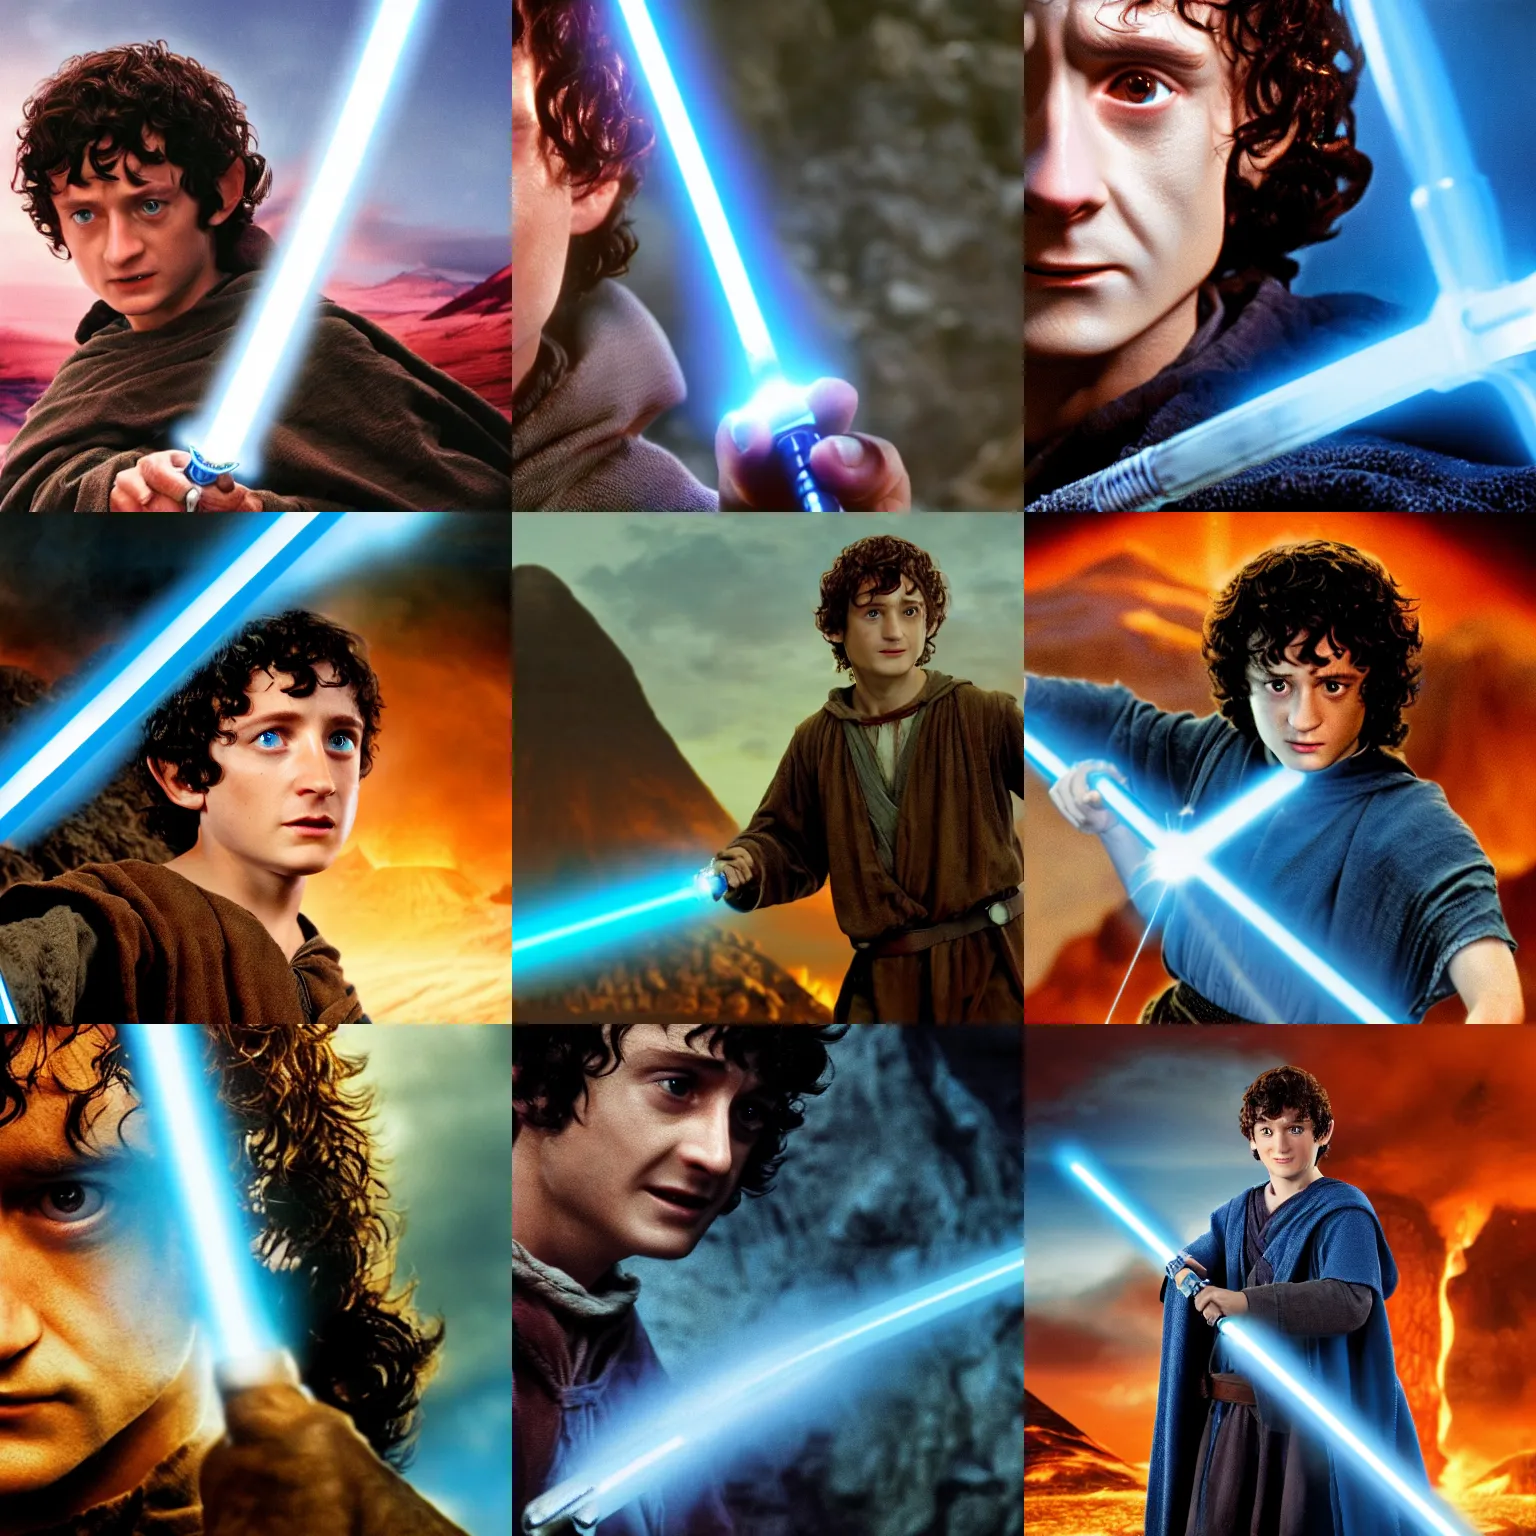 Prompt: A close up shot of Frodo Baggins with a blue lightsaber on Mount Doom, extreme detail, 4k movie still